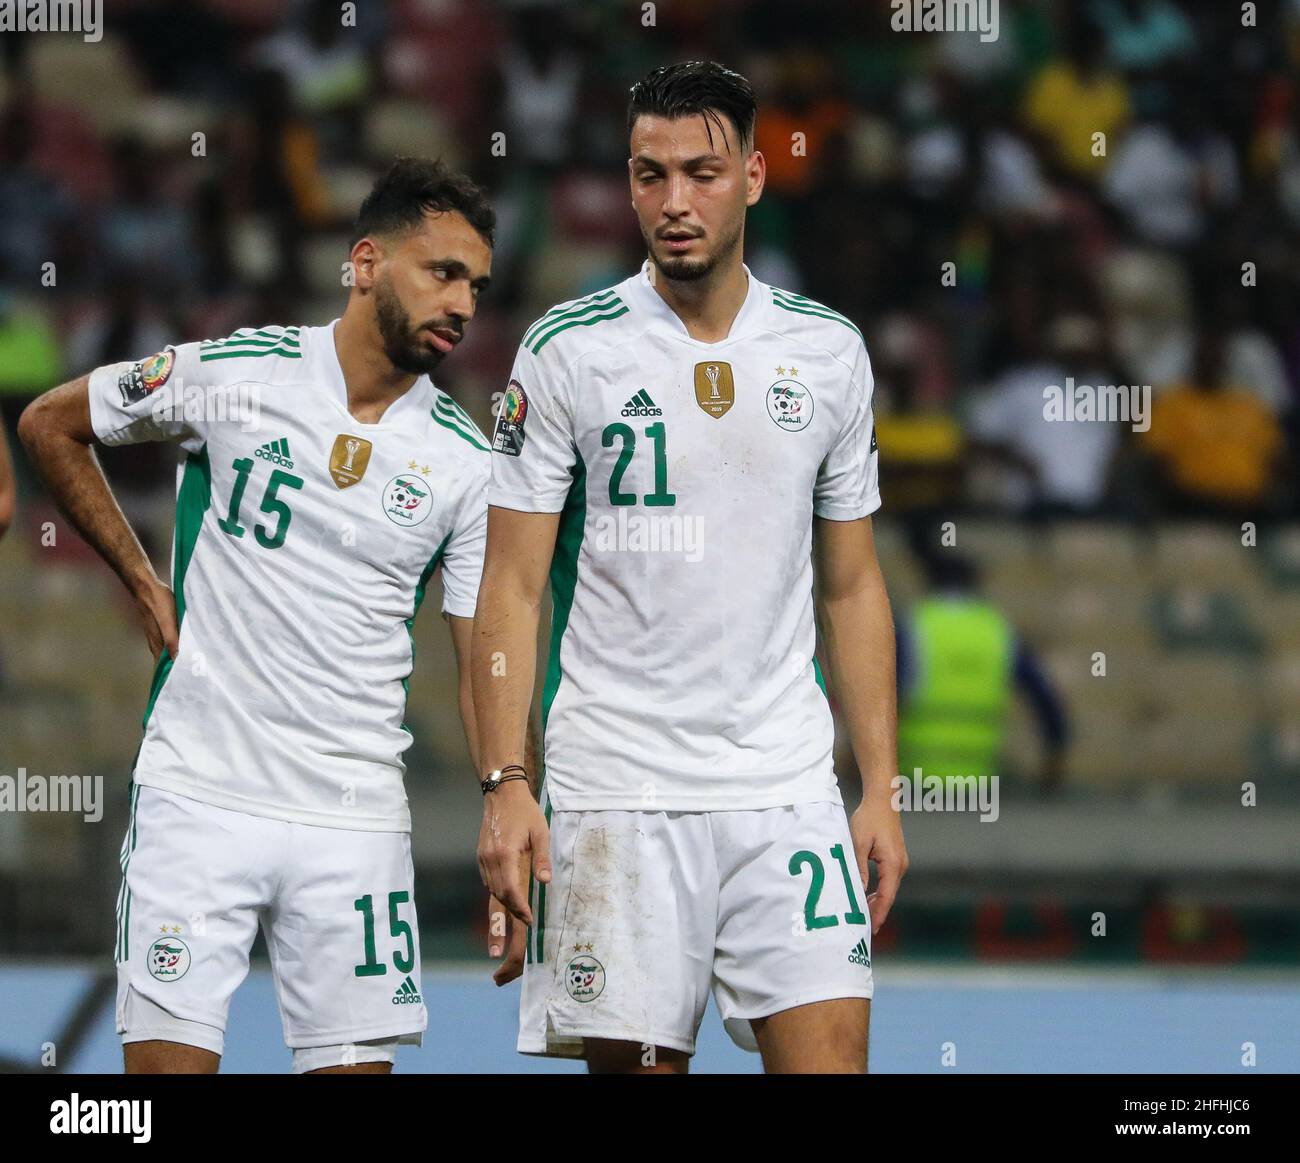 Douala, CAMEROON - JANUARY 16: Farid Boulaya and Ramy Bensebaini of Algeria gestures during the Africa Cup of Nations group E match between Algeria and Equatorial Guinea at Stade de Japoma on January 16 2022 in Douala, Cameroon. (Photo by SF) Credit: Sebo47/Alamy Live News Stock Photo